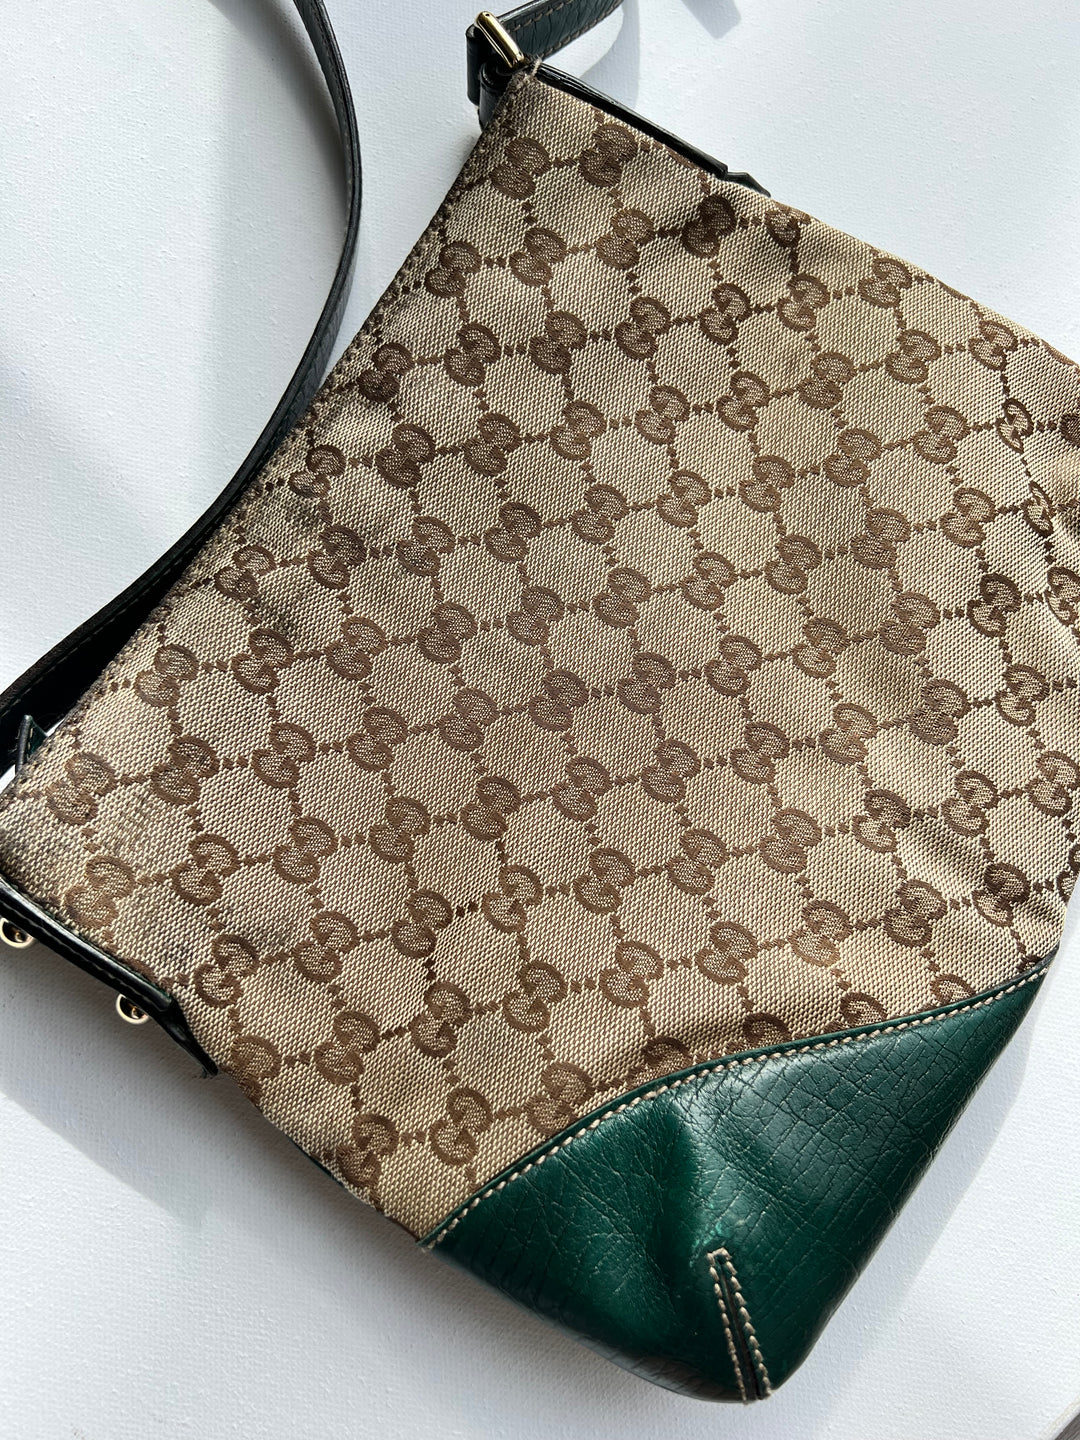 Gucci Horsebit GG Canvas Shoulder Bag with Green Leather